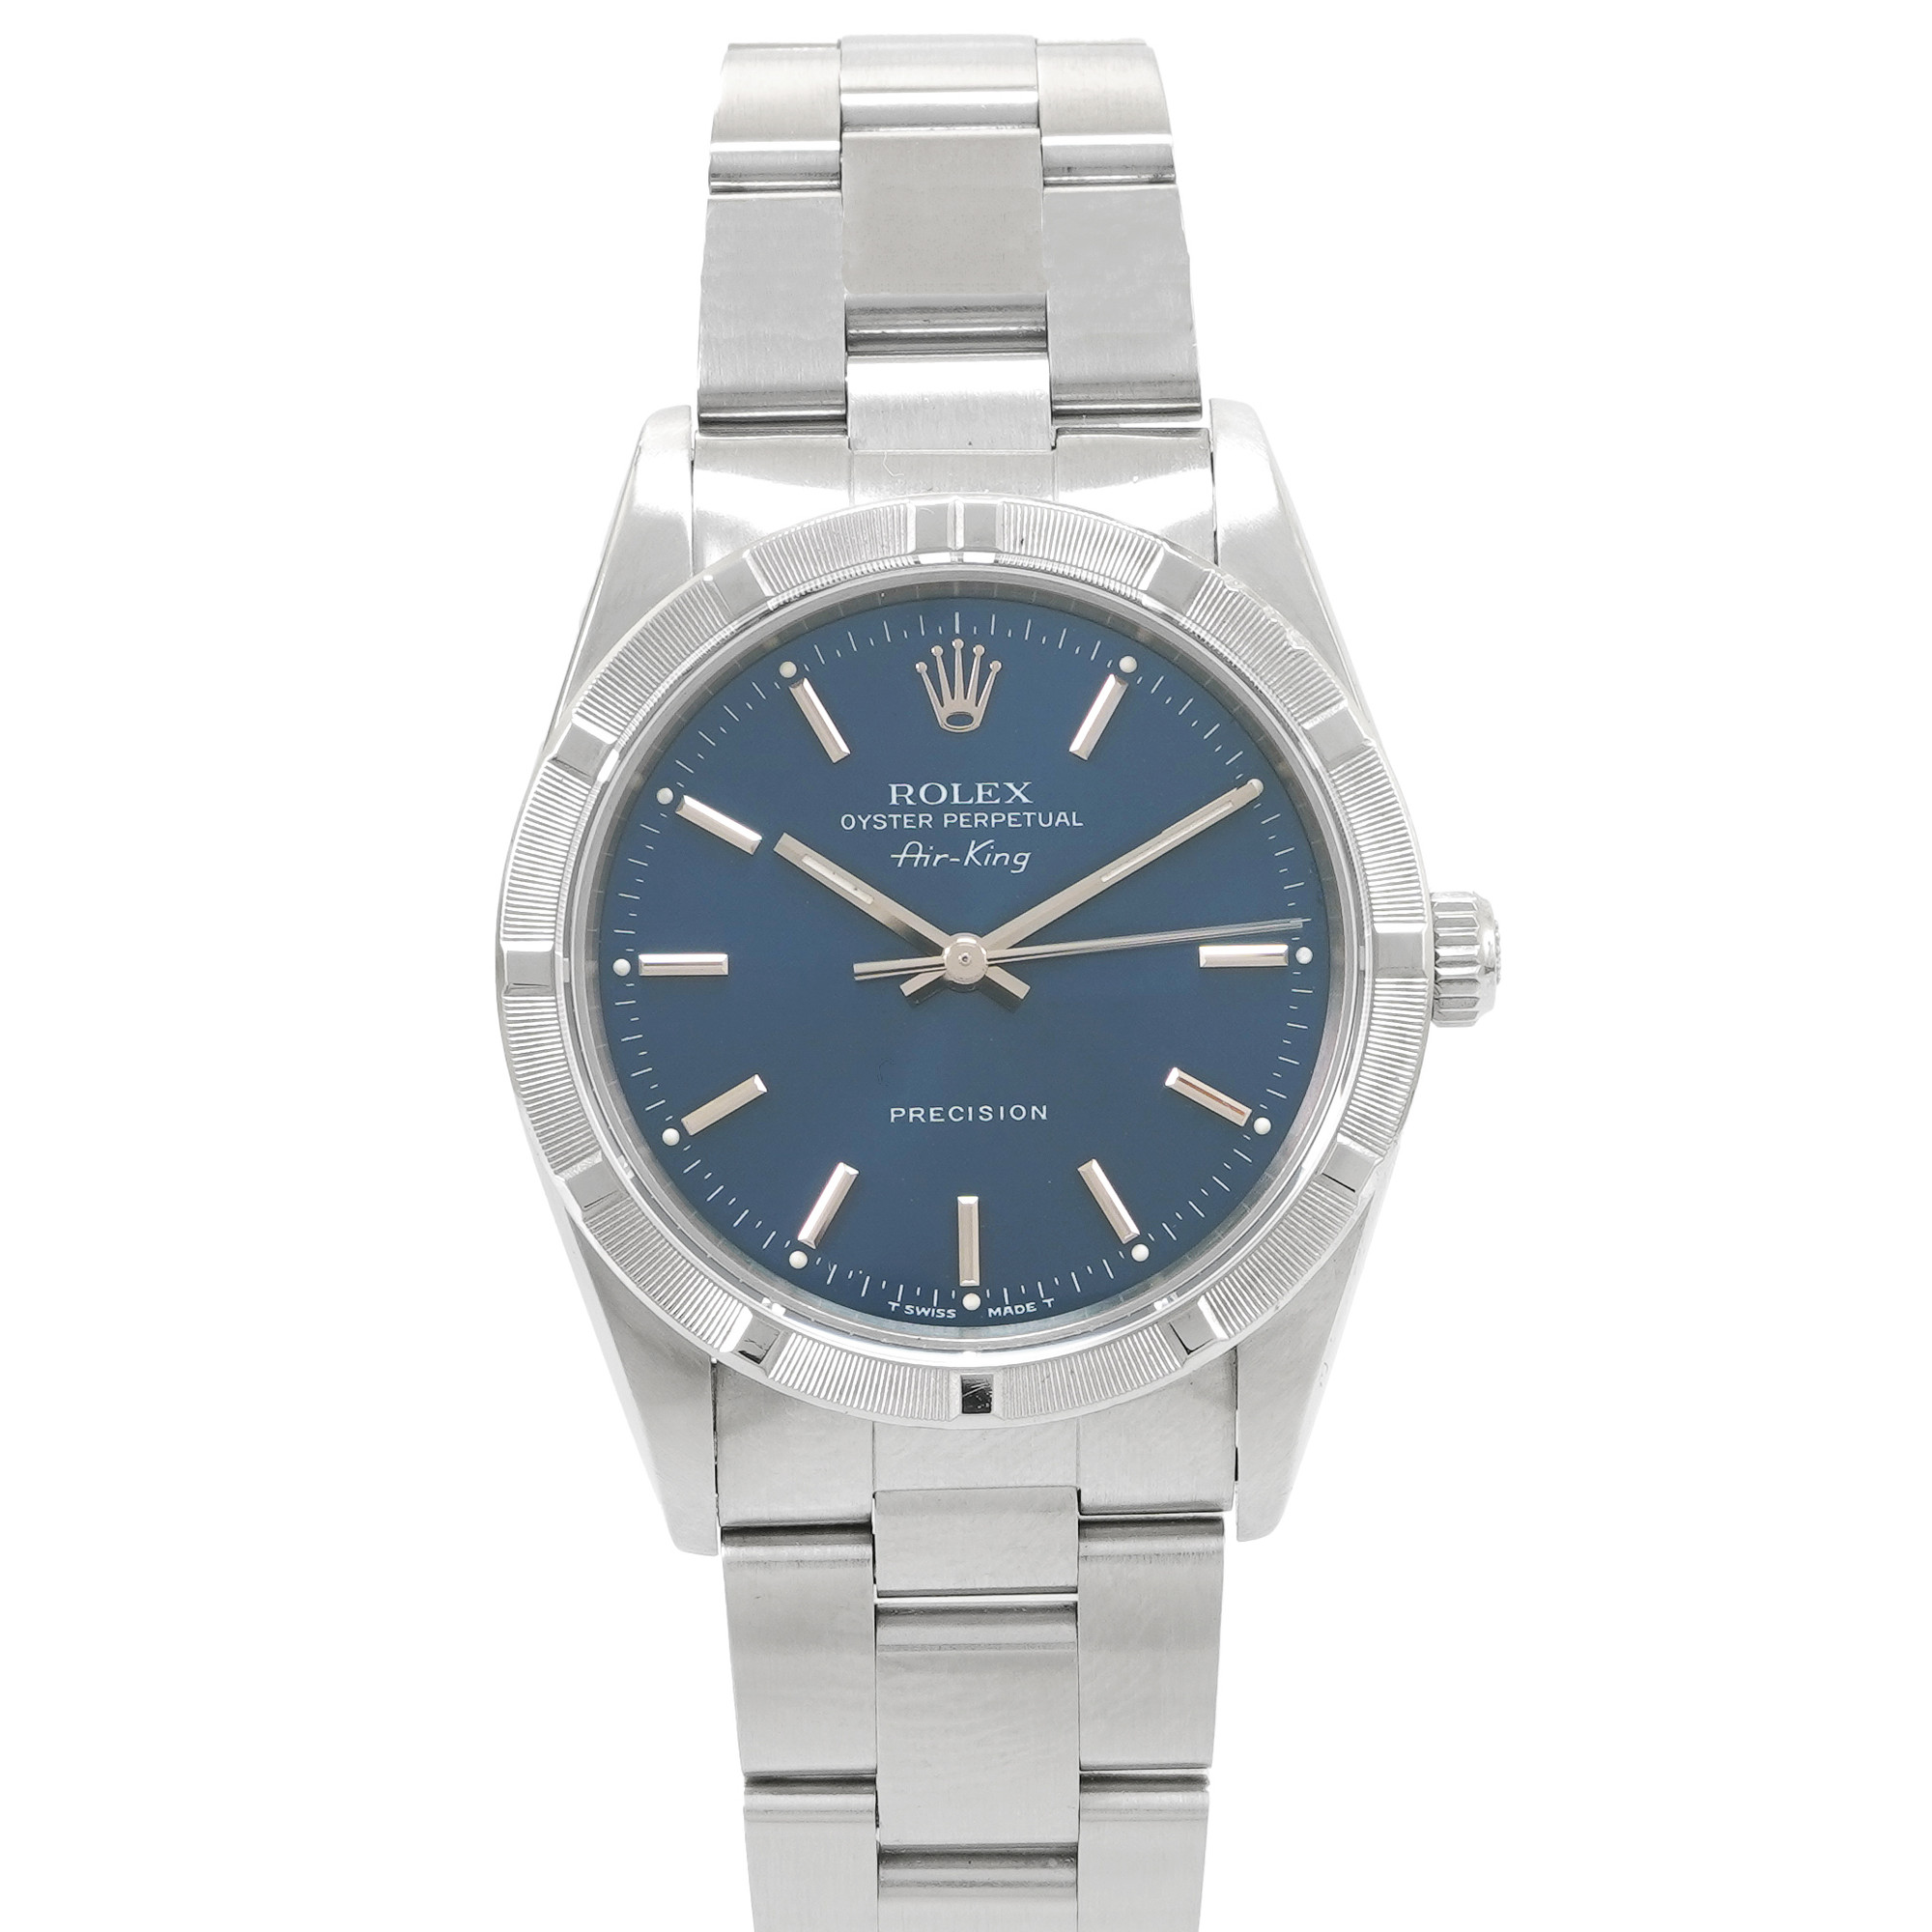 Rolex Airking Oyster Perpetual 14010 *Blue Dial* - Inventory 5385